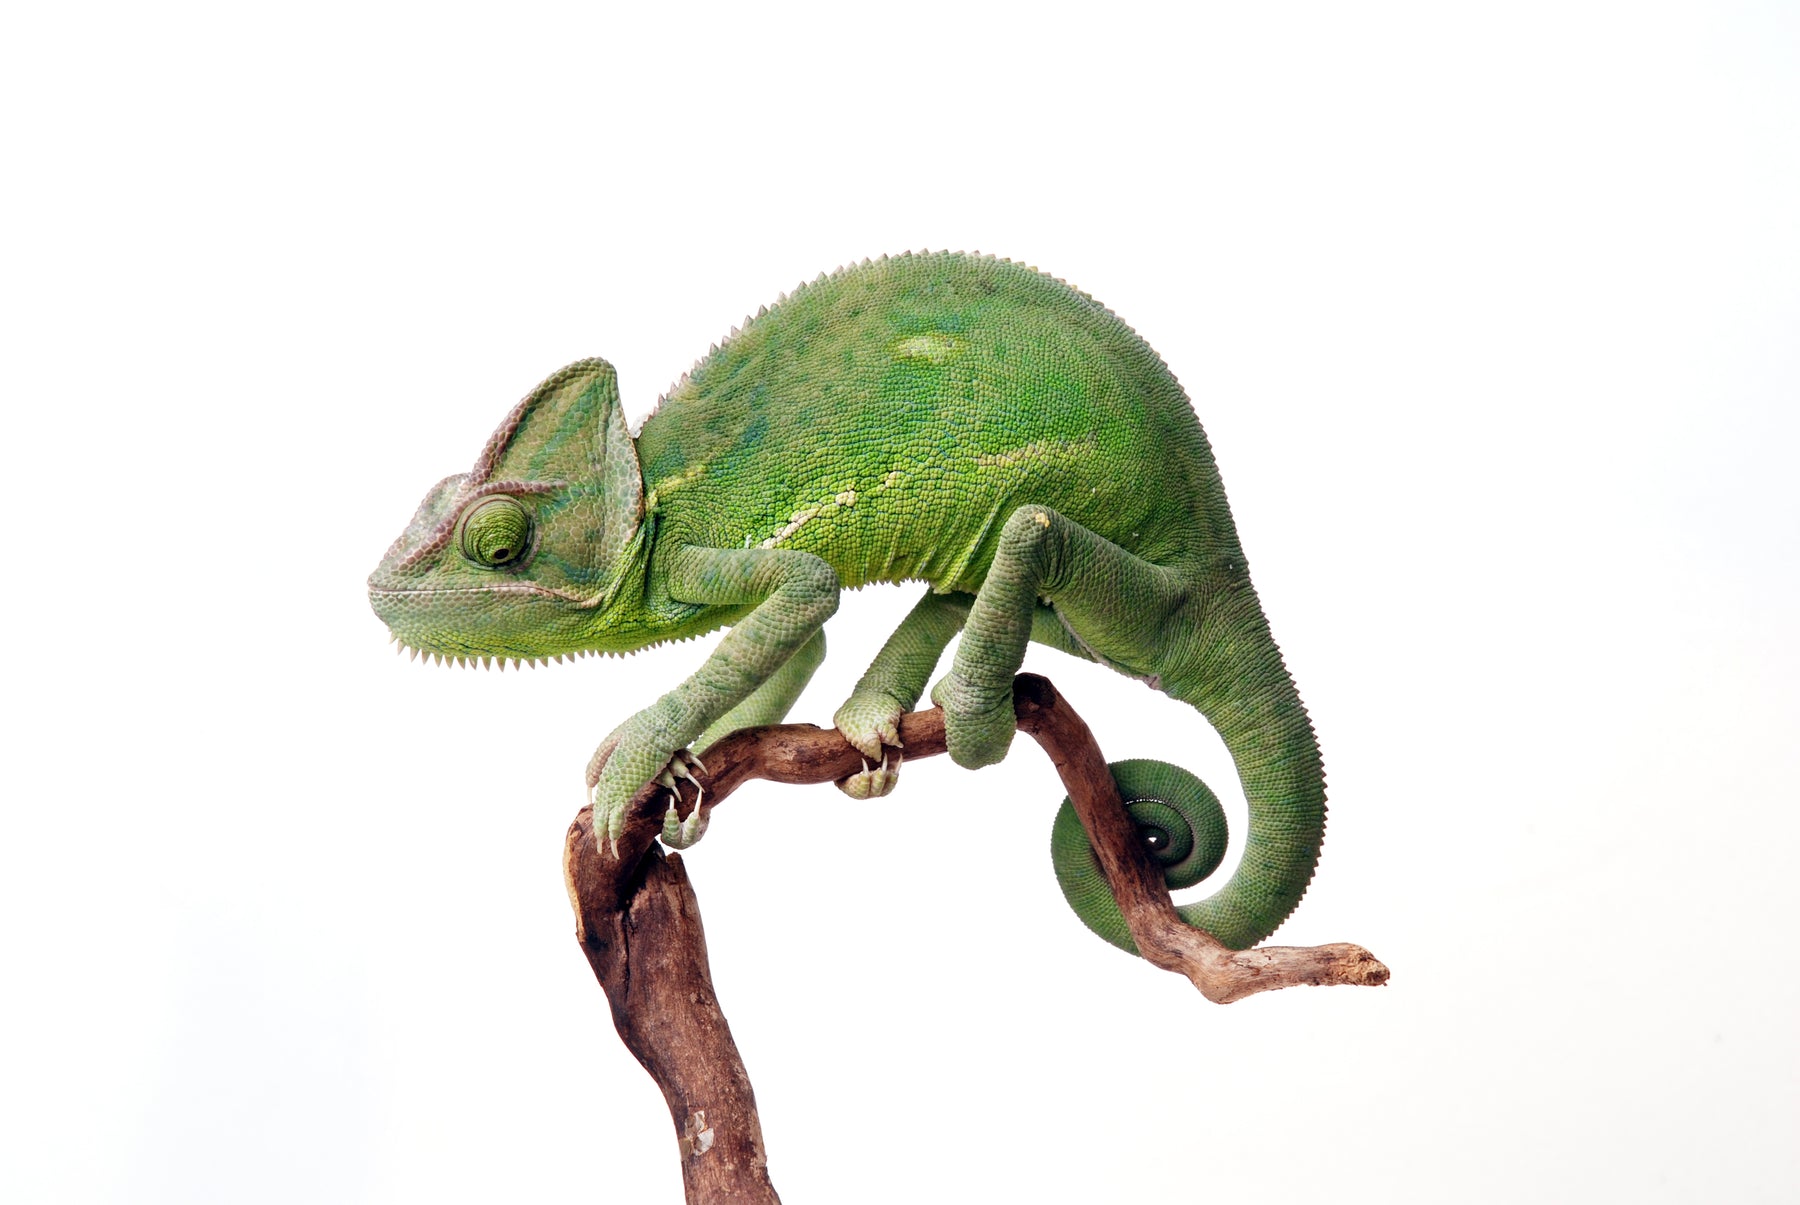 Picky Chameleon? Here’s What Might Be Going On